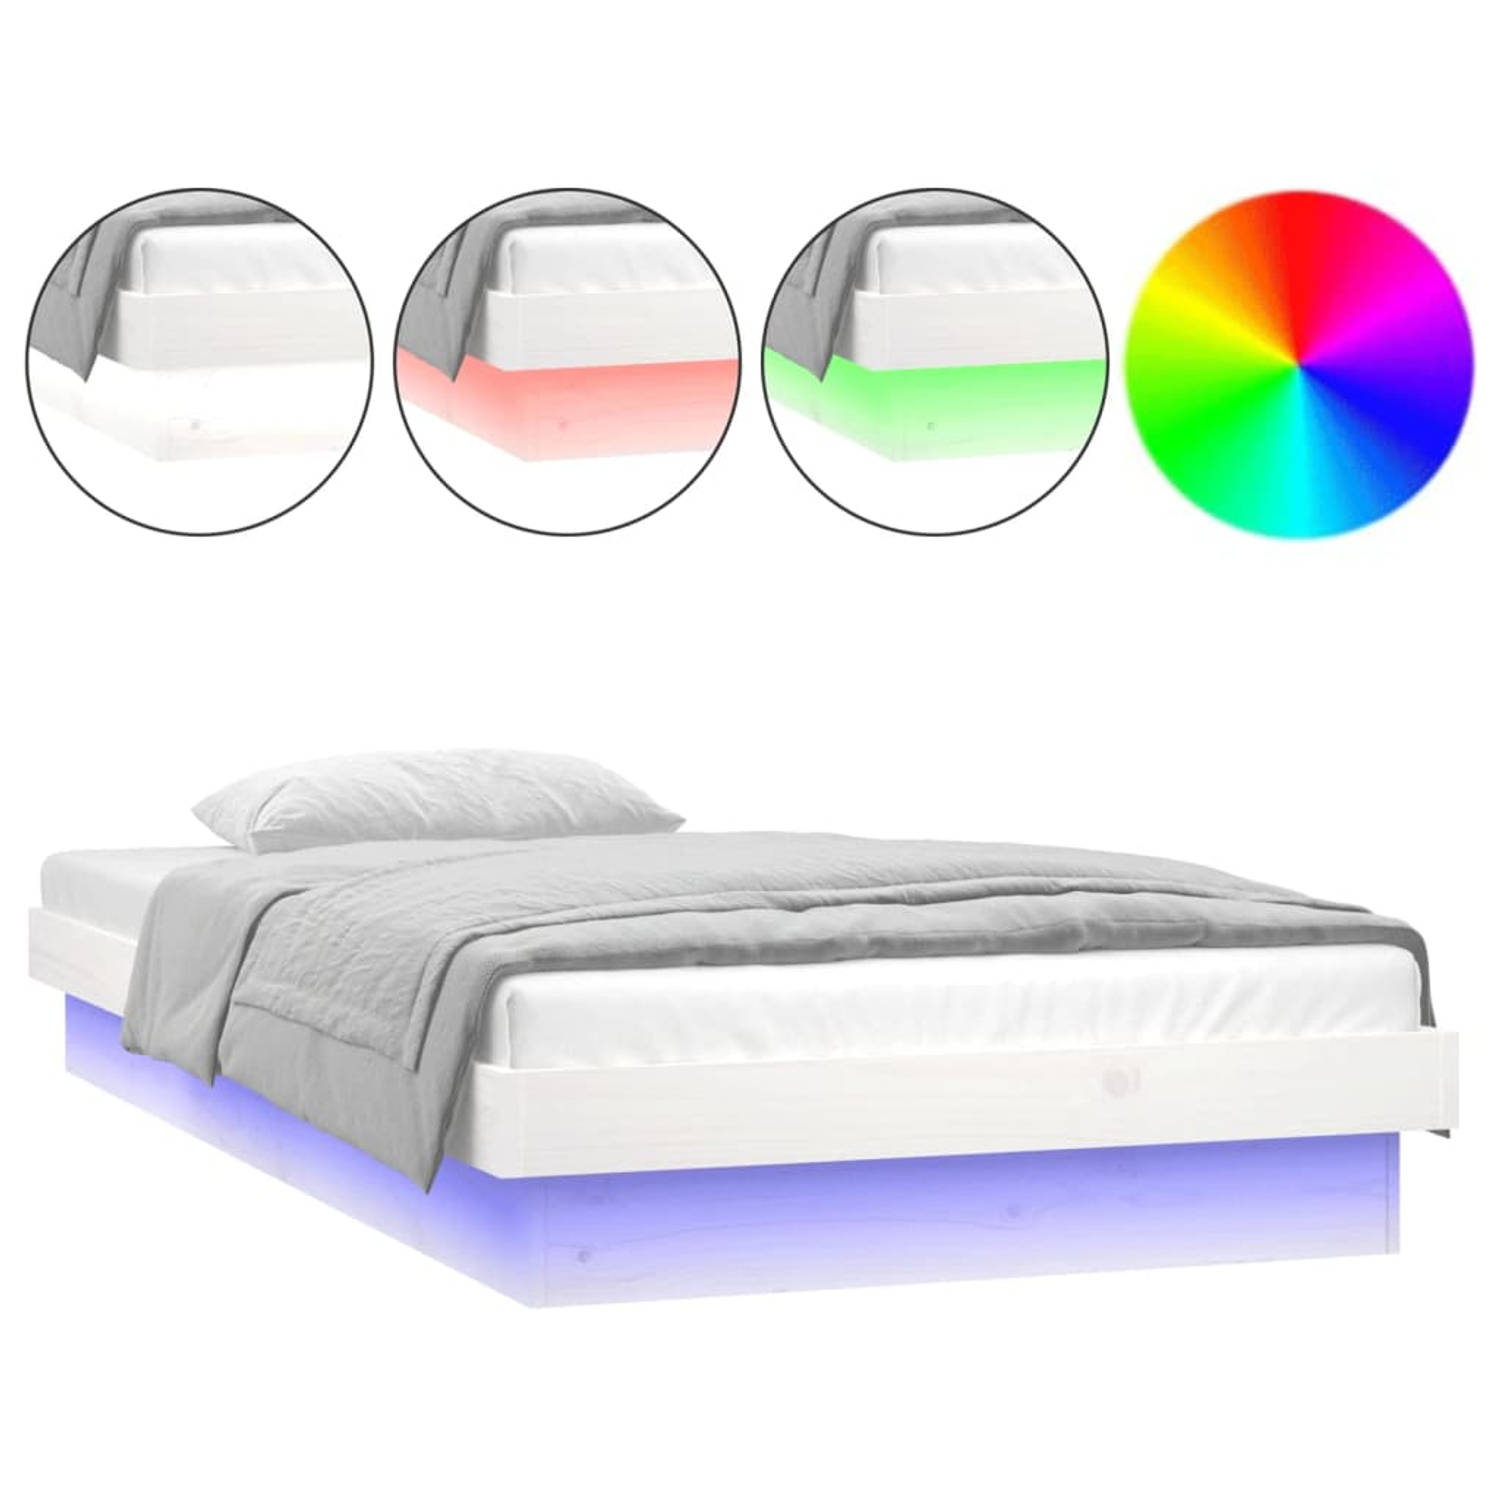 The Living Store Bedframe LED massief hout 90x200 cm - Bedframe - Bedframes - Eenpersoonsbed - Bed - Bedombouw - Ledikant - Houten Bedframe - Eenpersoonsbedden - Bedden - Bedombouw